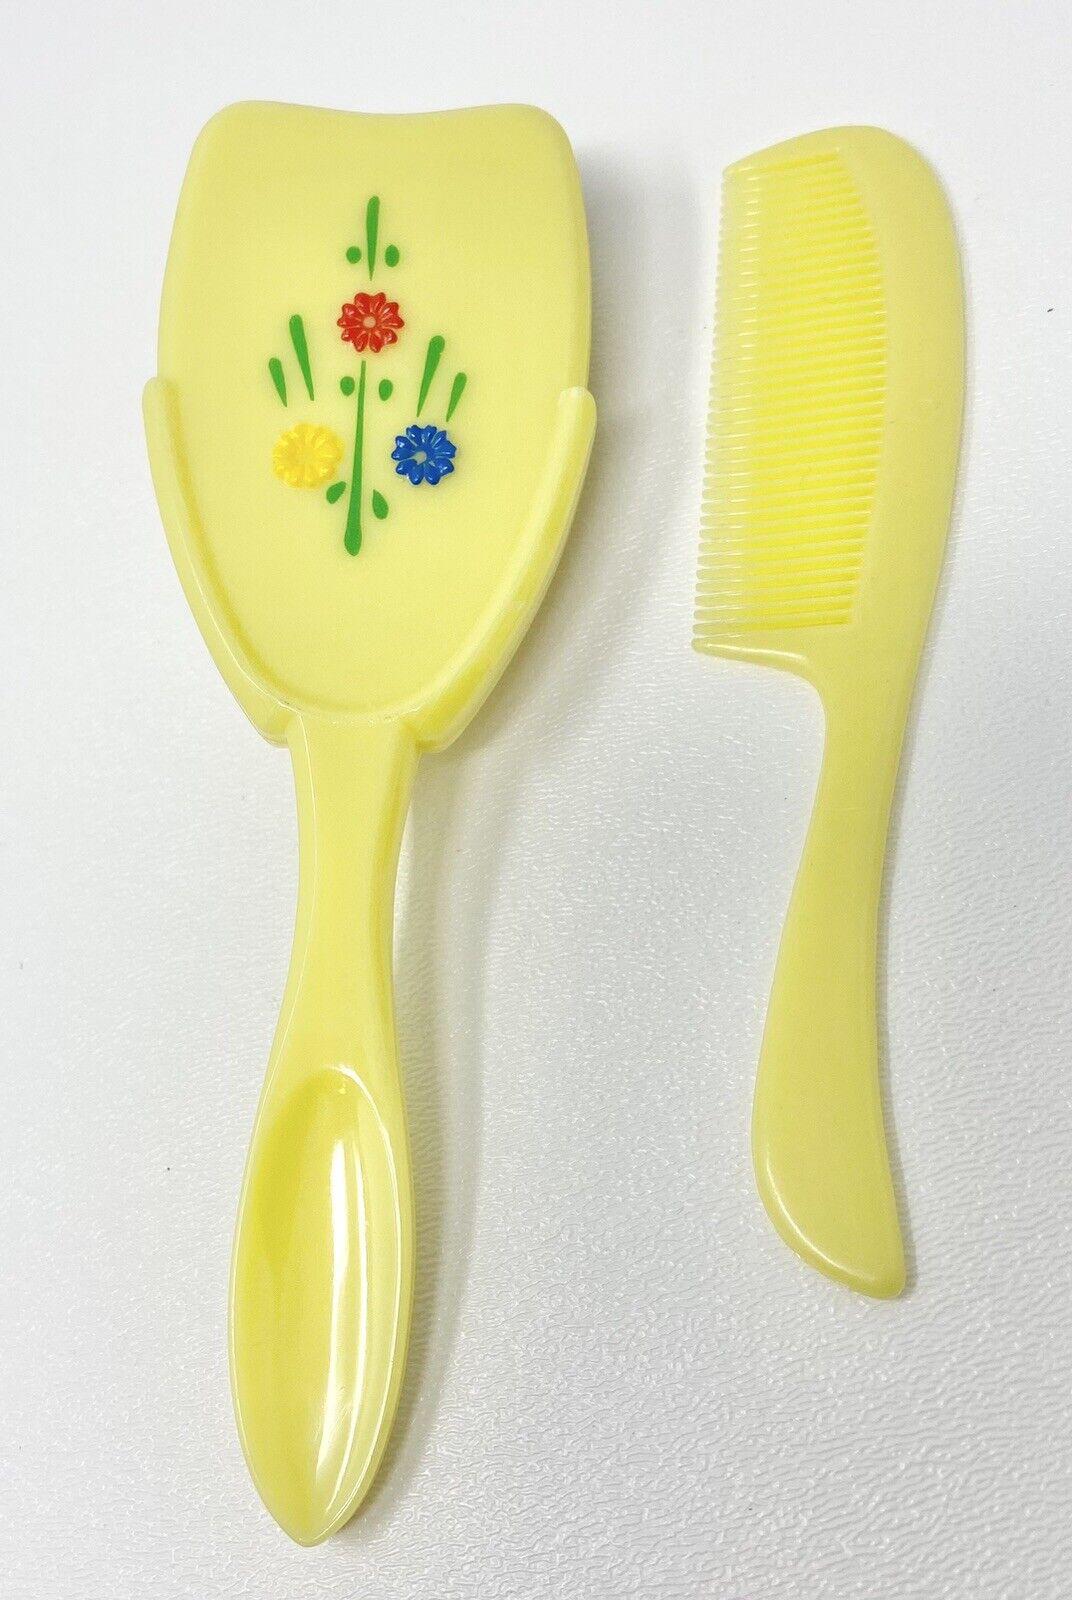 Vintage Baby Doll Brush Comb Set Plastic Yellow Flowers 70s Hippie Hong Kong